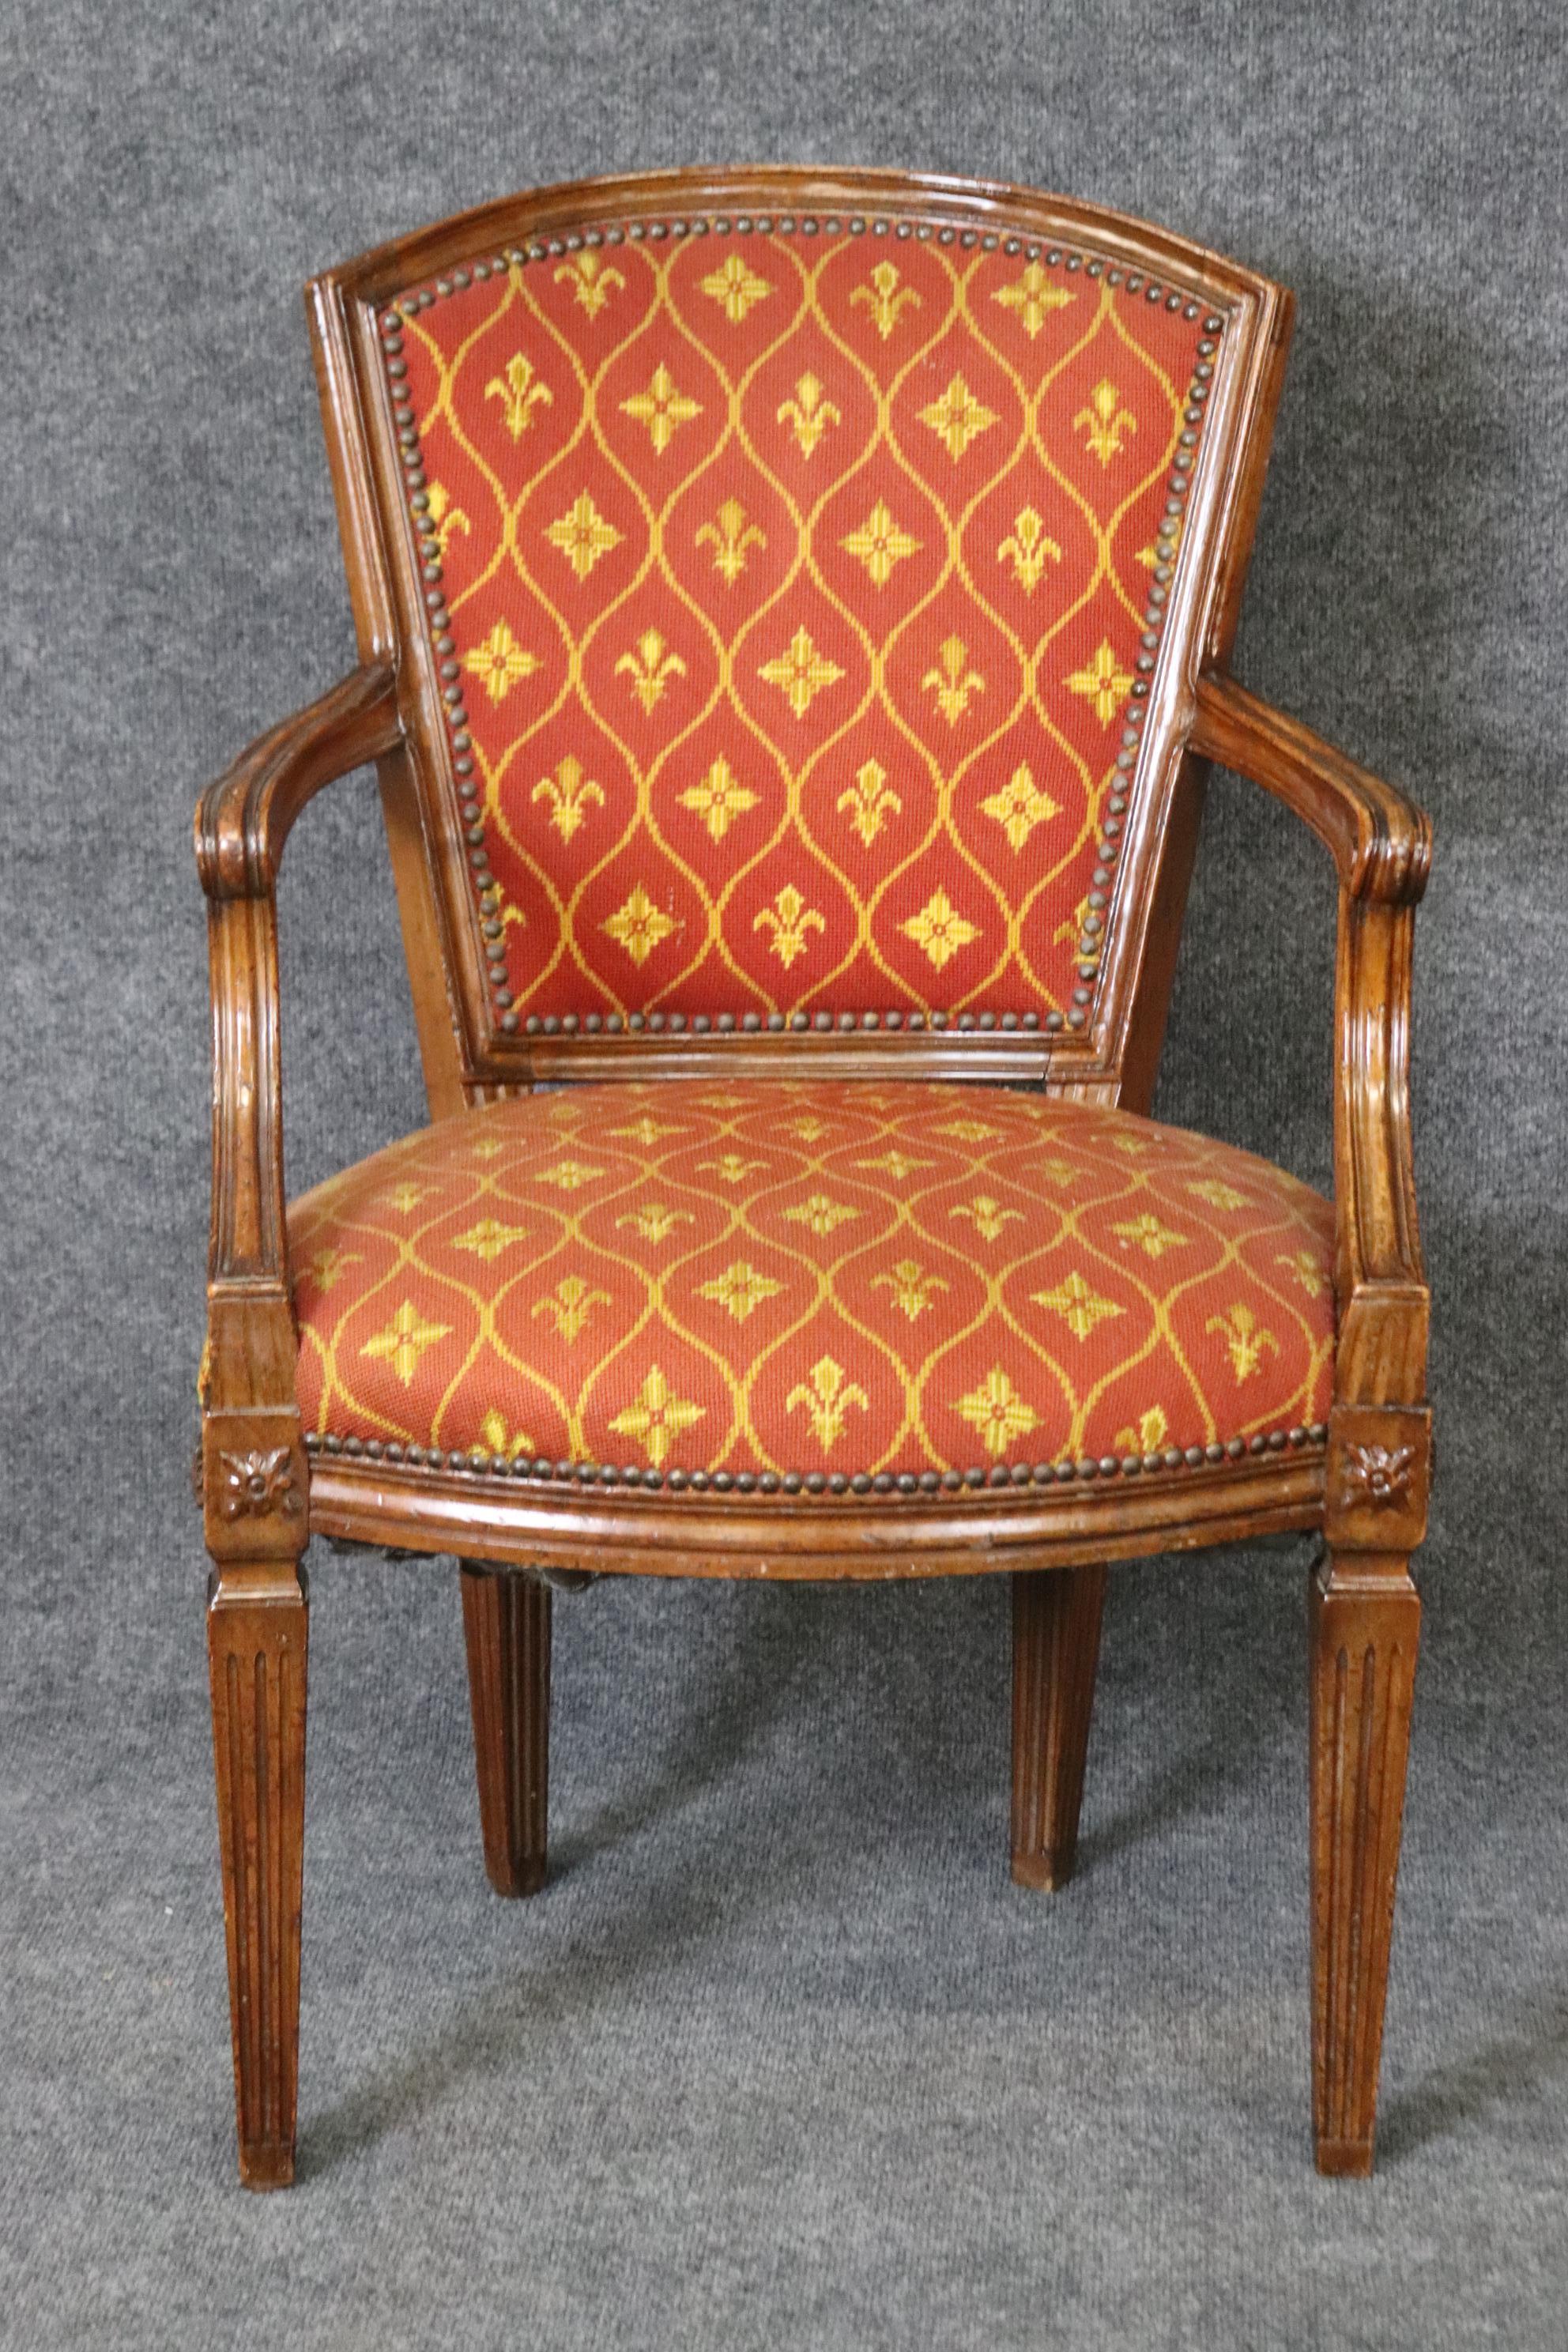 Dimensions: Height: 37 1/4in Width: 24 1/4in Depth: 26in Seat Height: 18 1/4in 

This beautiful antique Italian 18th C. or early 19th C. Louis XVI style carved walnut armchair is made of the highest quality! The chair is in good vintage condition